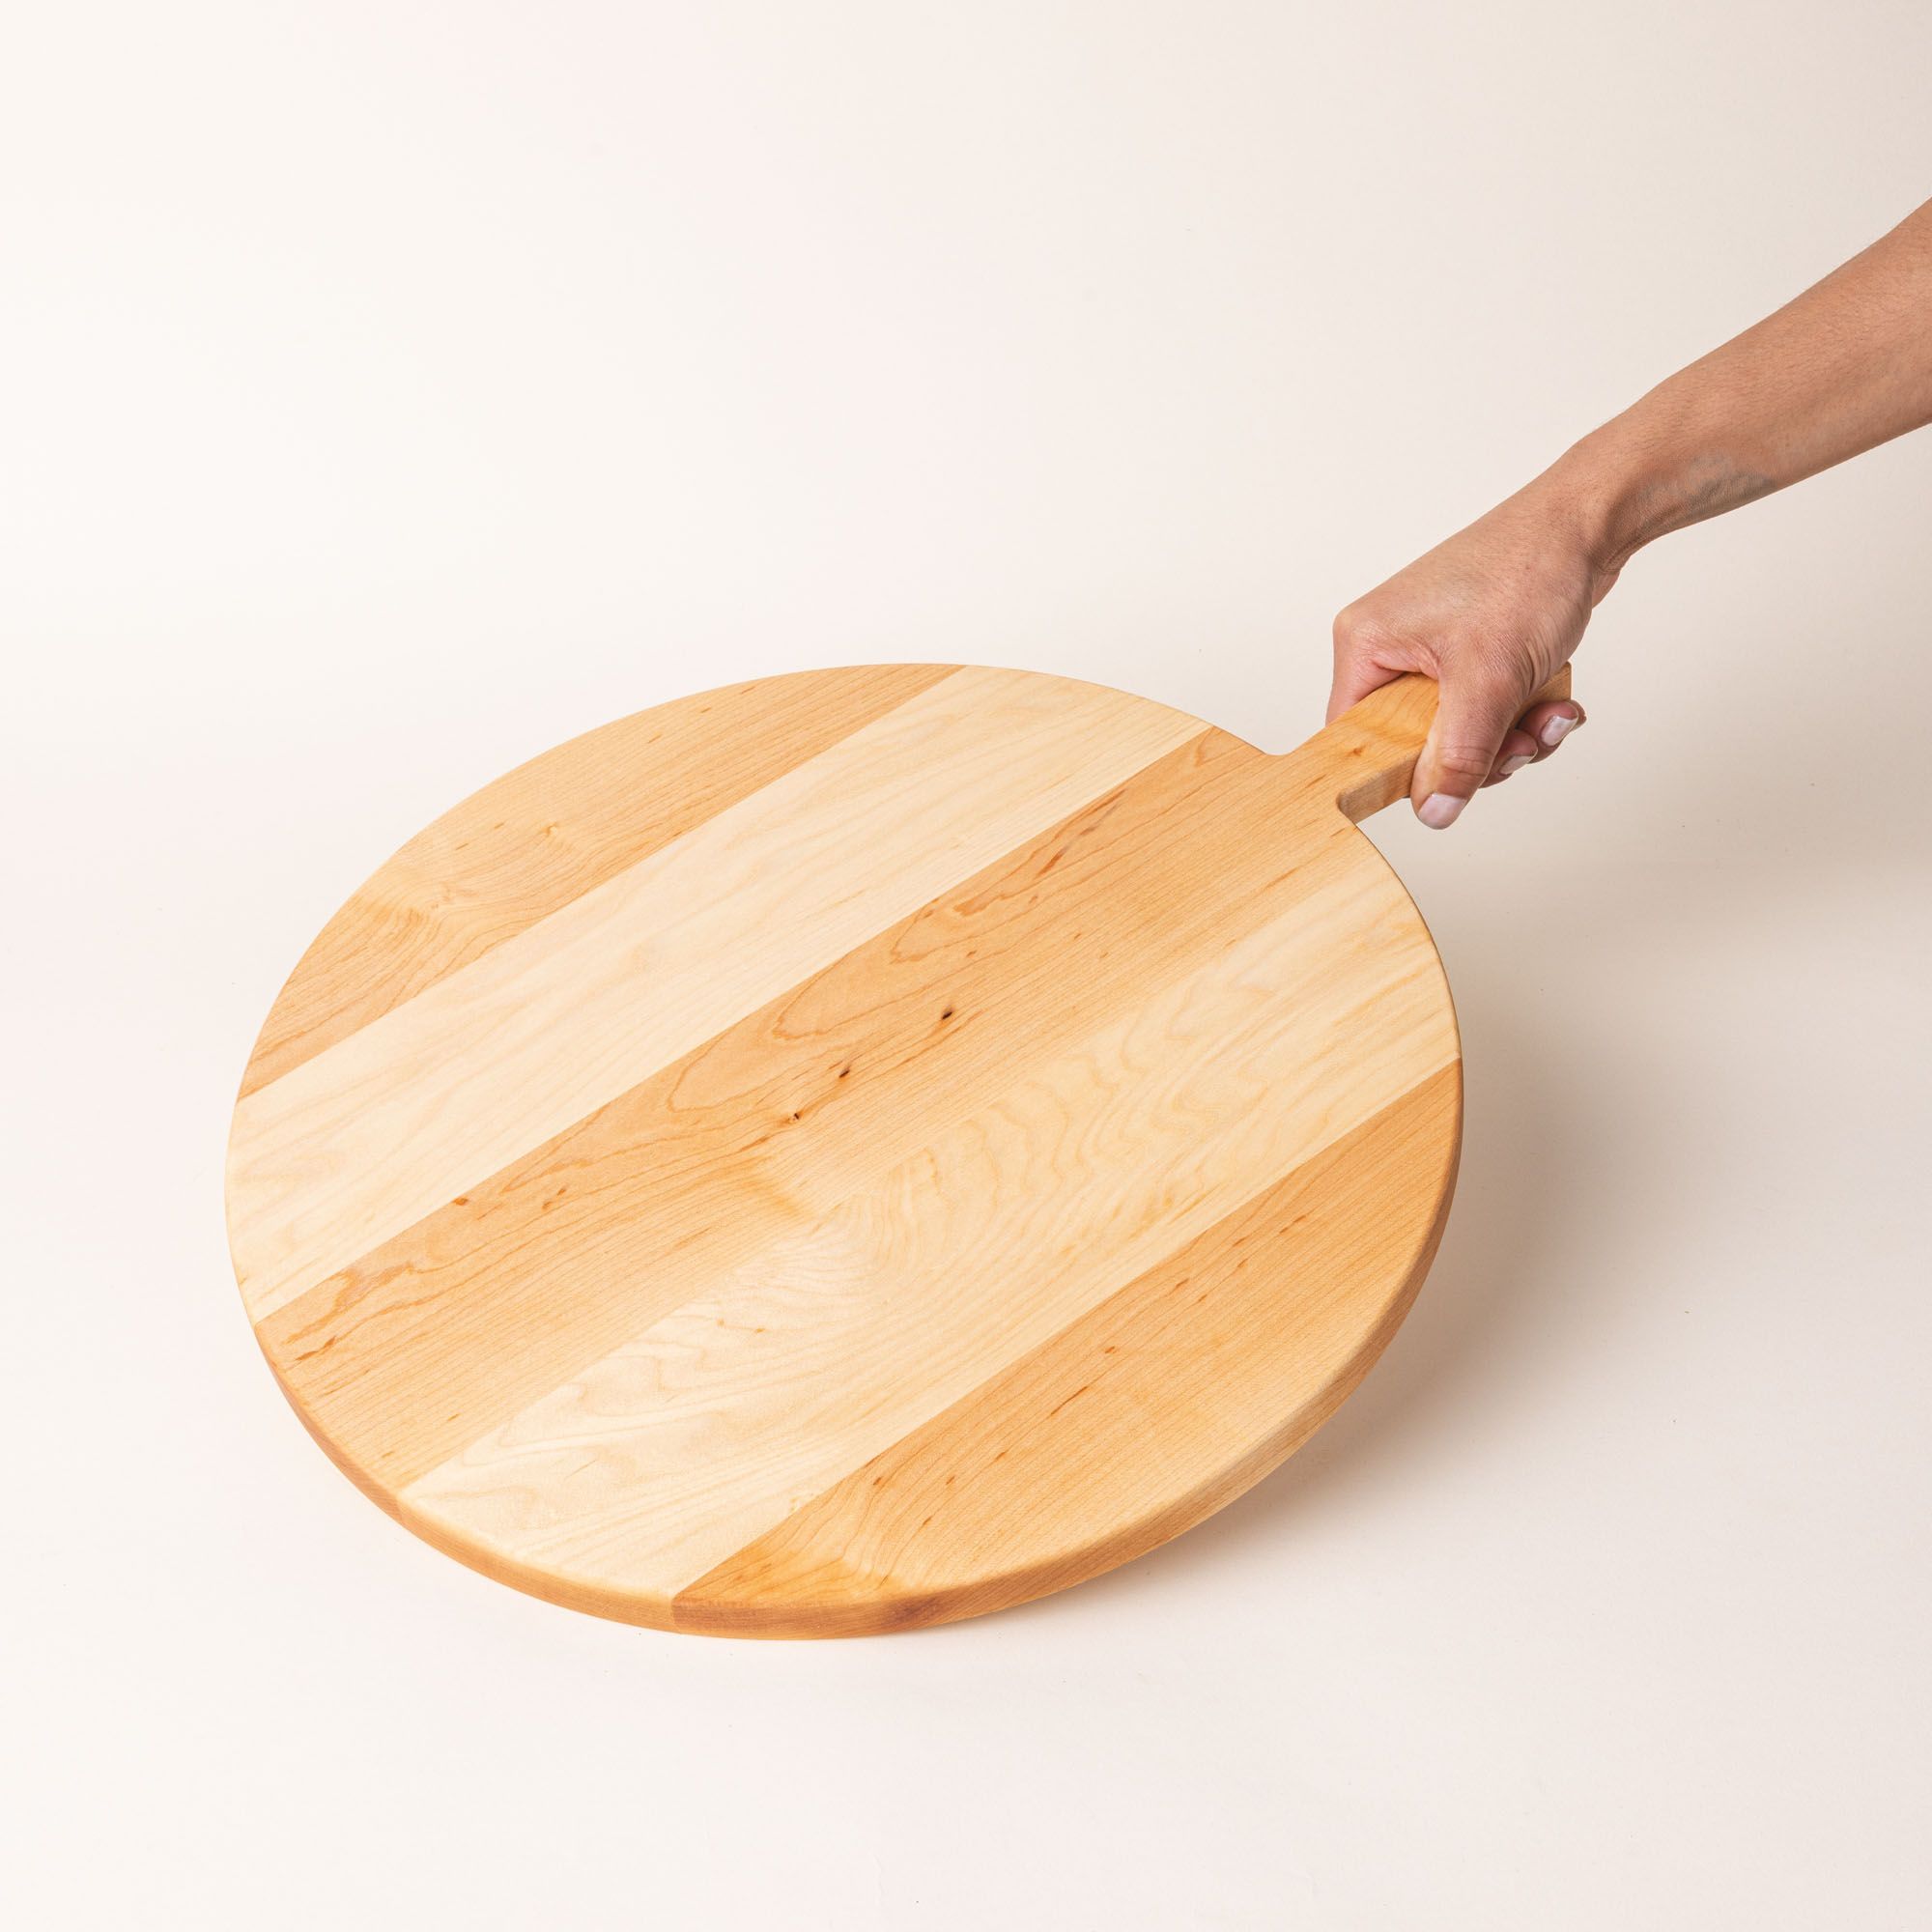 A round wooden serving board with a short rectangular handle with a hole for hanging